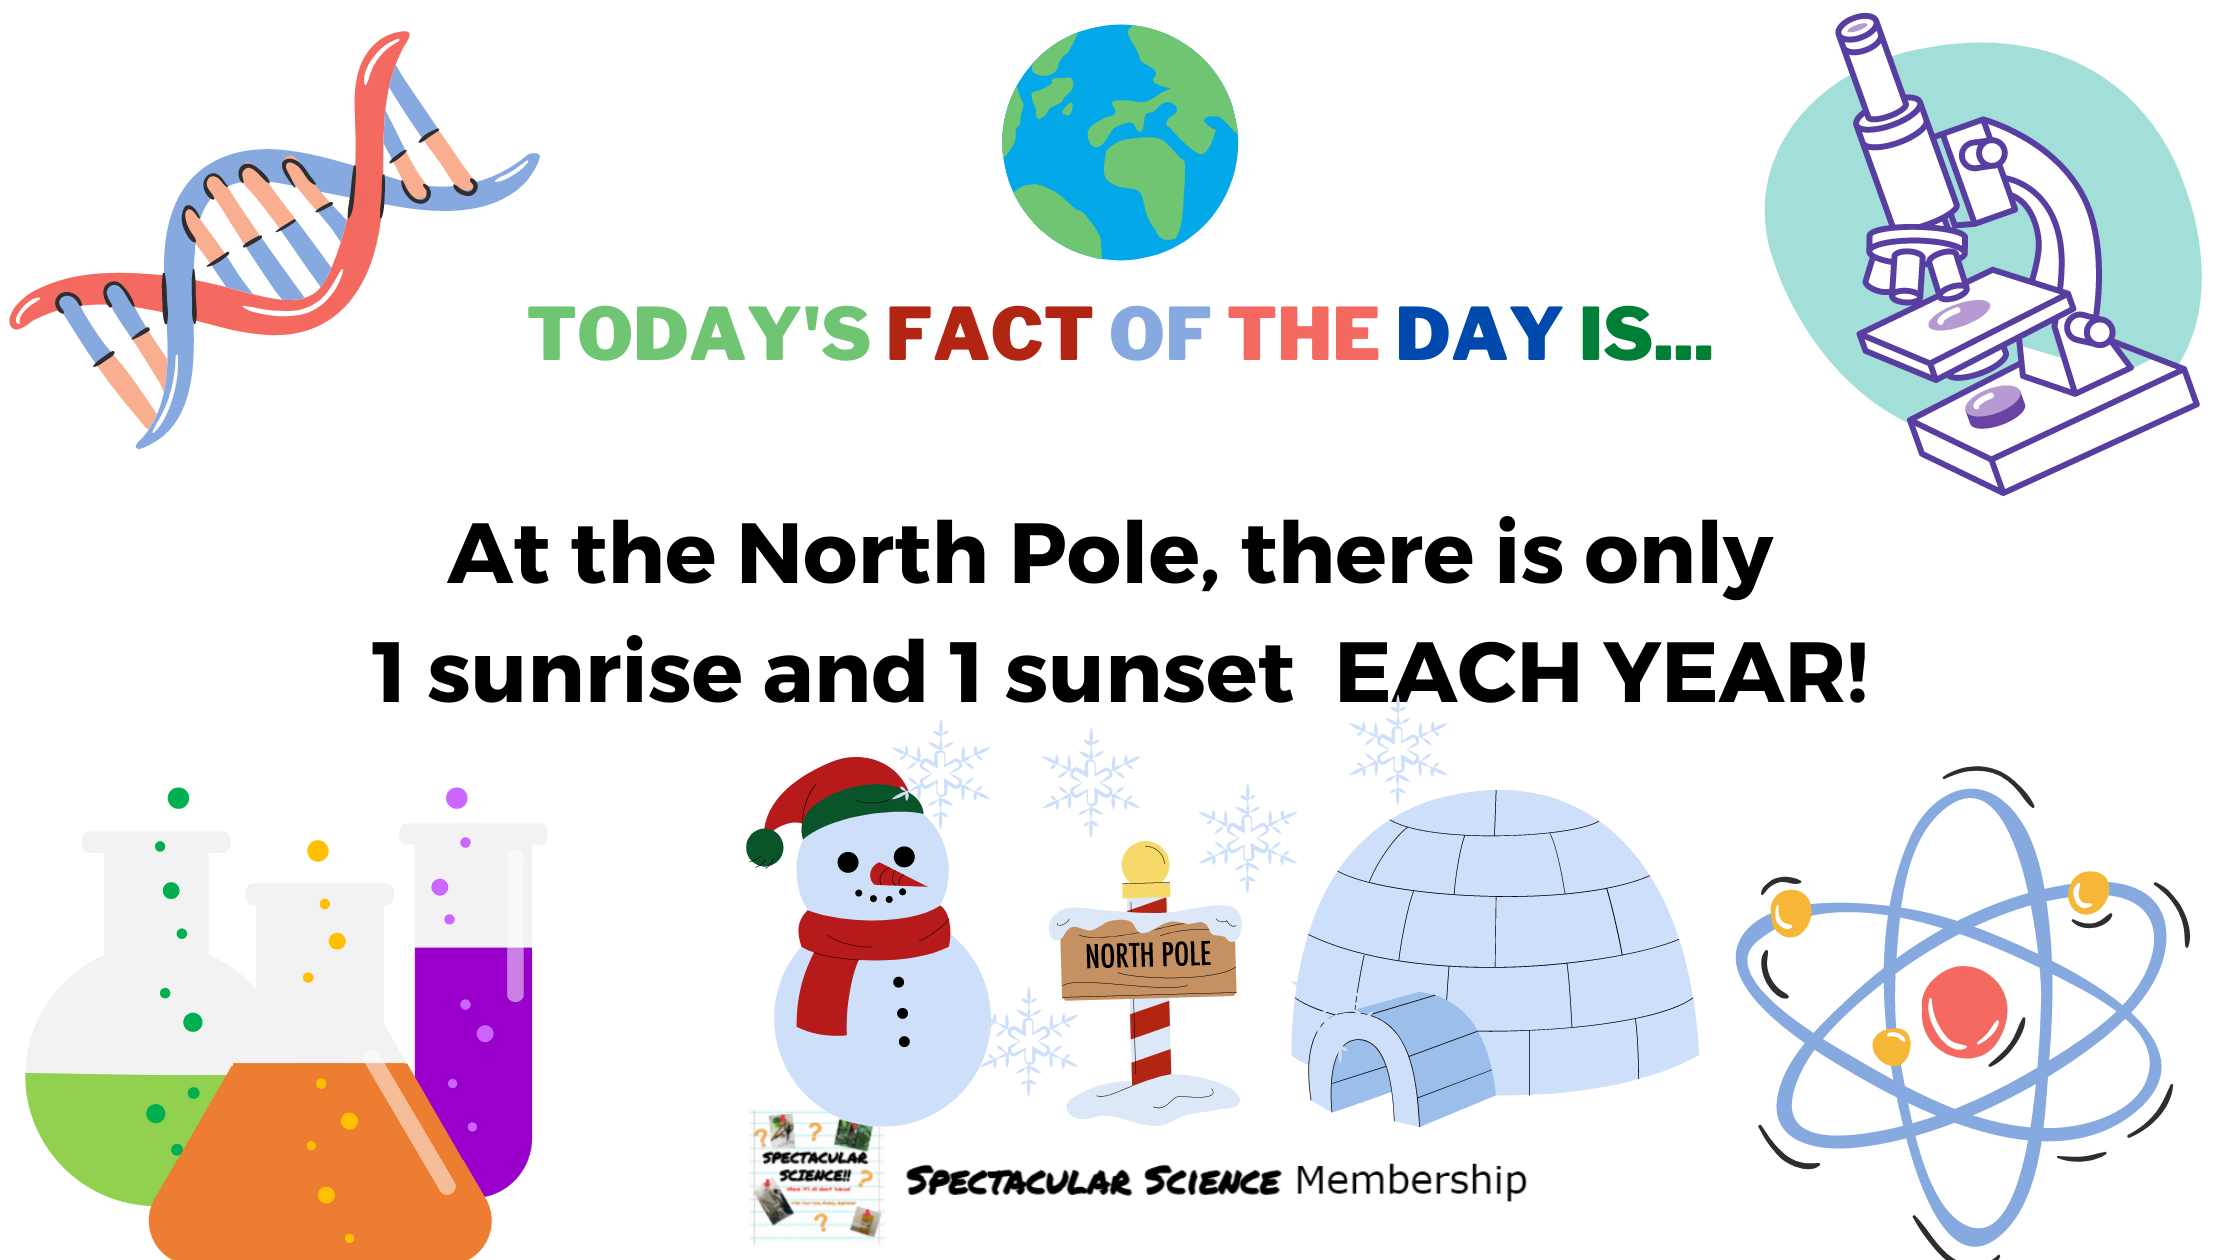 Fact of the Day Image Dec. 25th